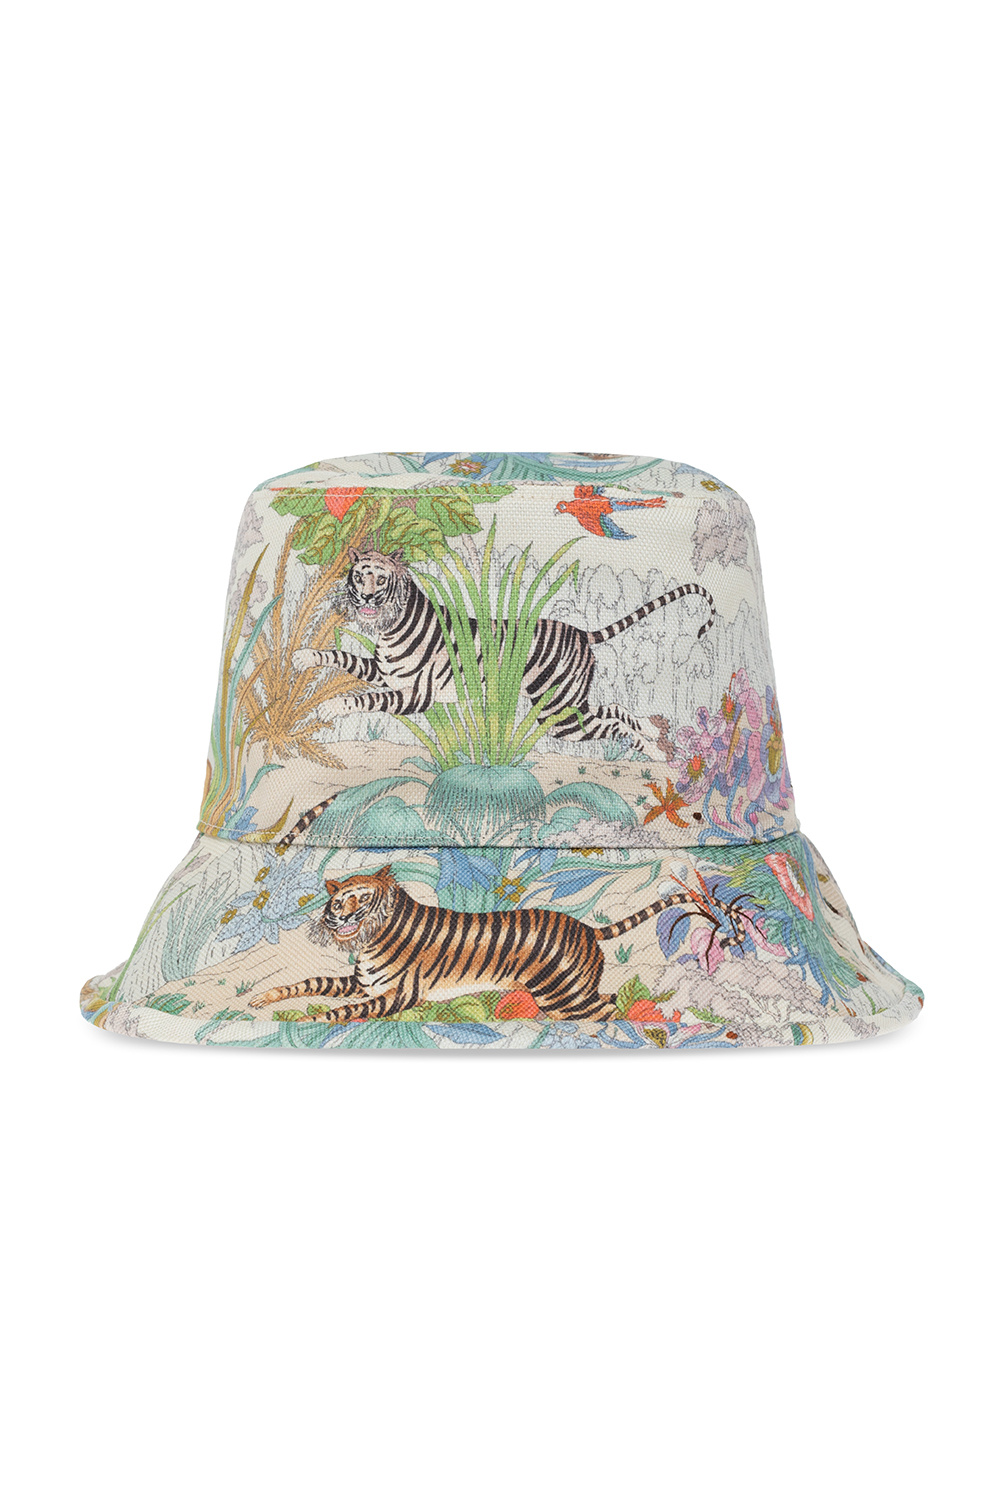 Gucci Bucket men hat from the ‘Gucci Tiger’ collection